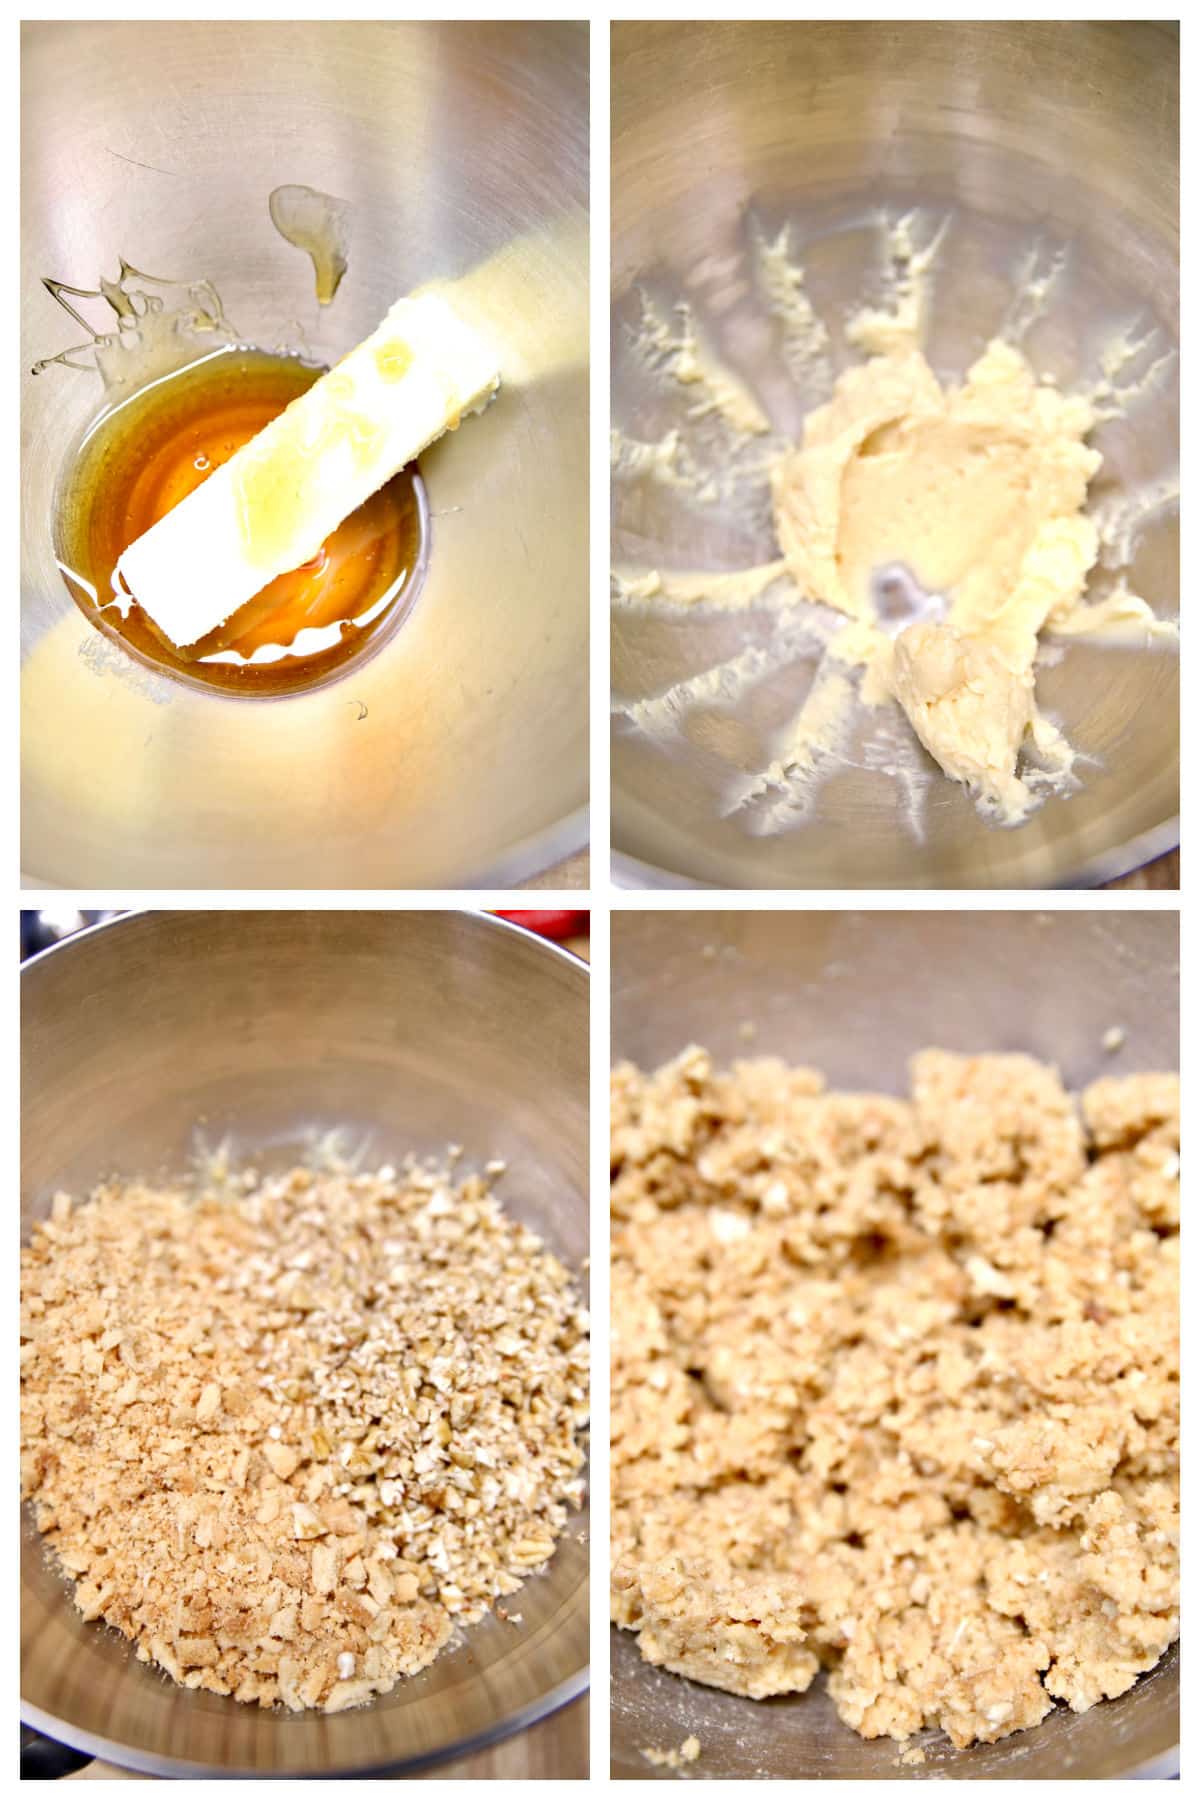 Making bourbon balls with butter, honey, pecans and cookie crumbs.